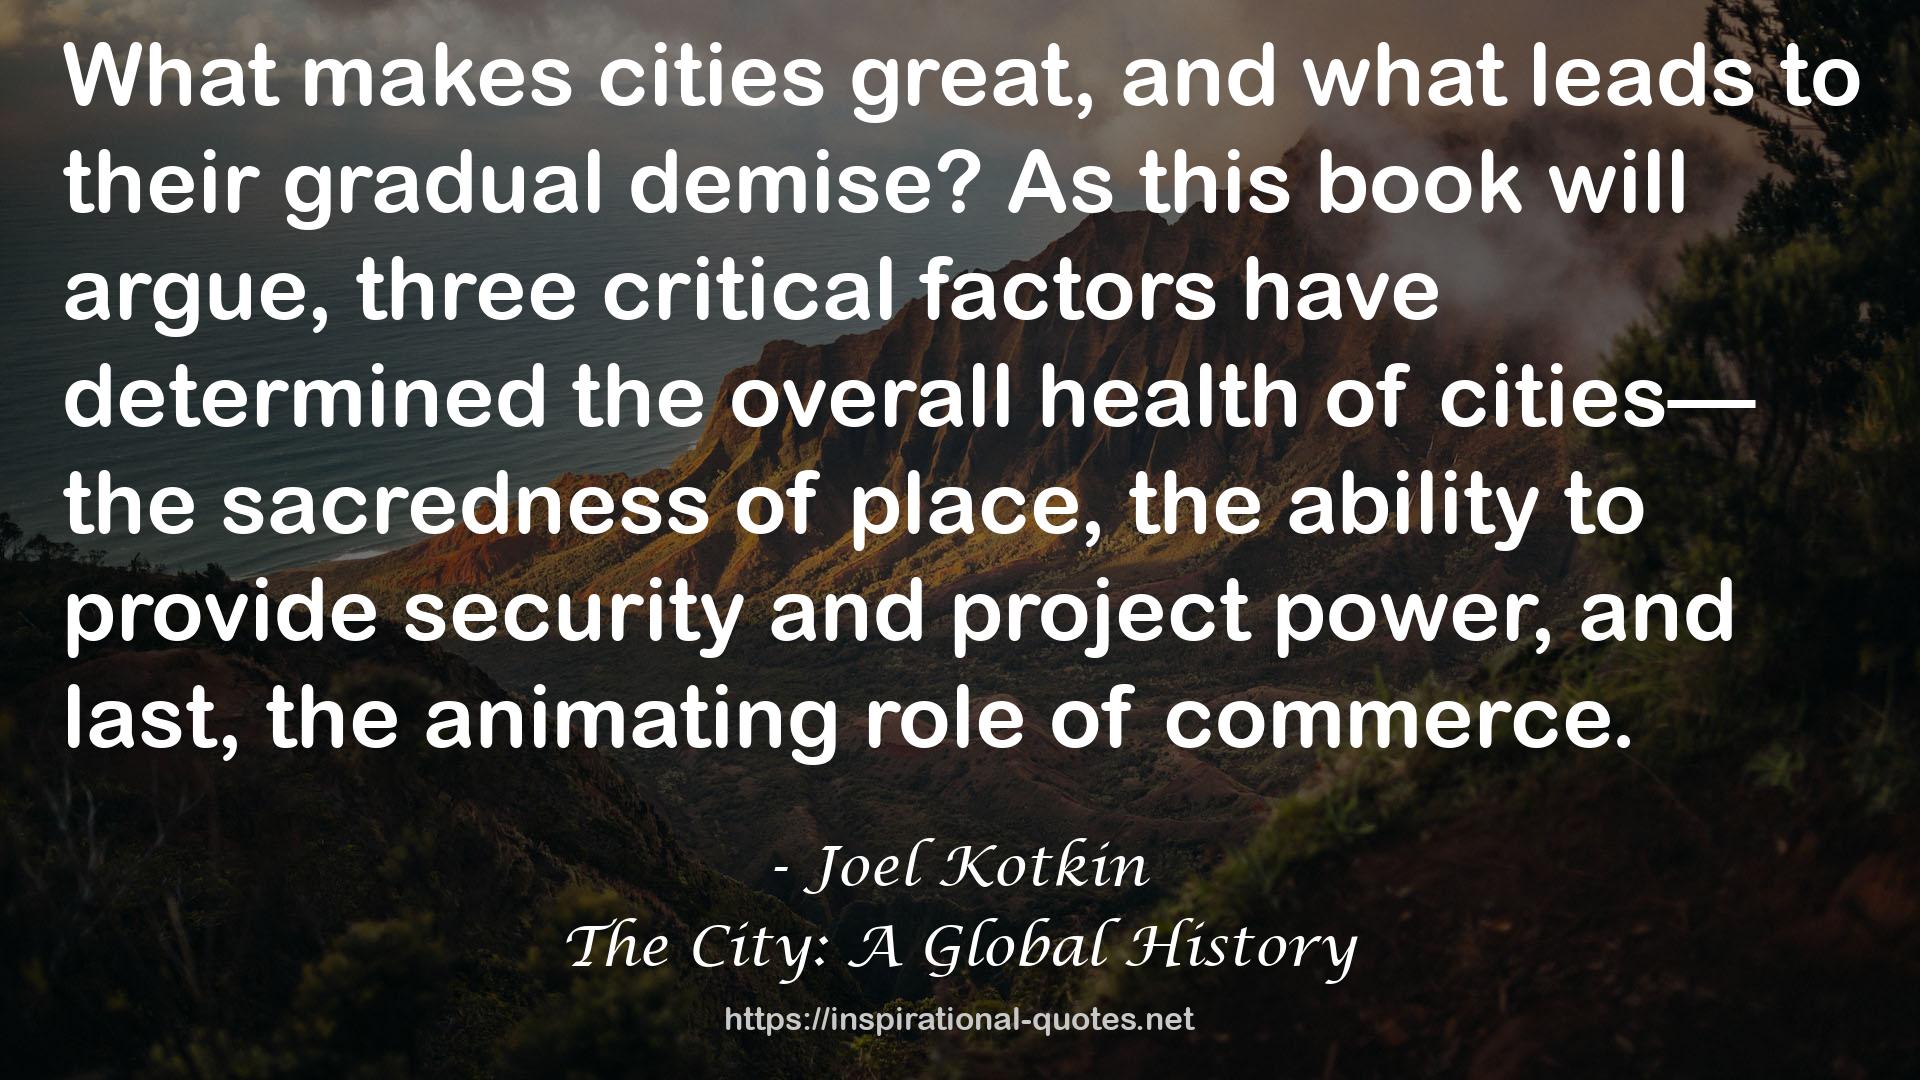 The City: A Global History QUOTES